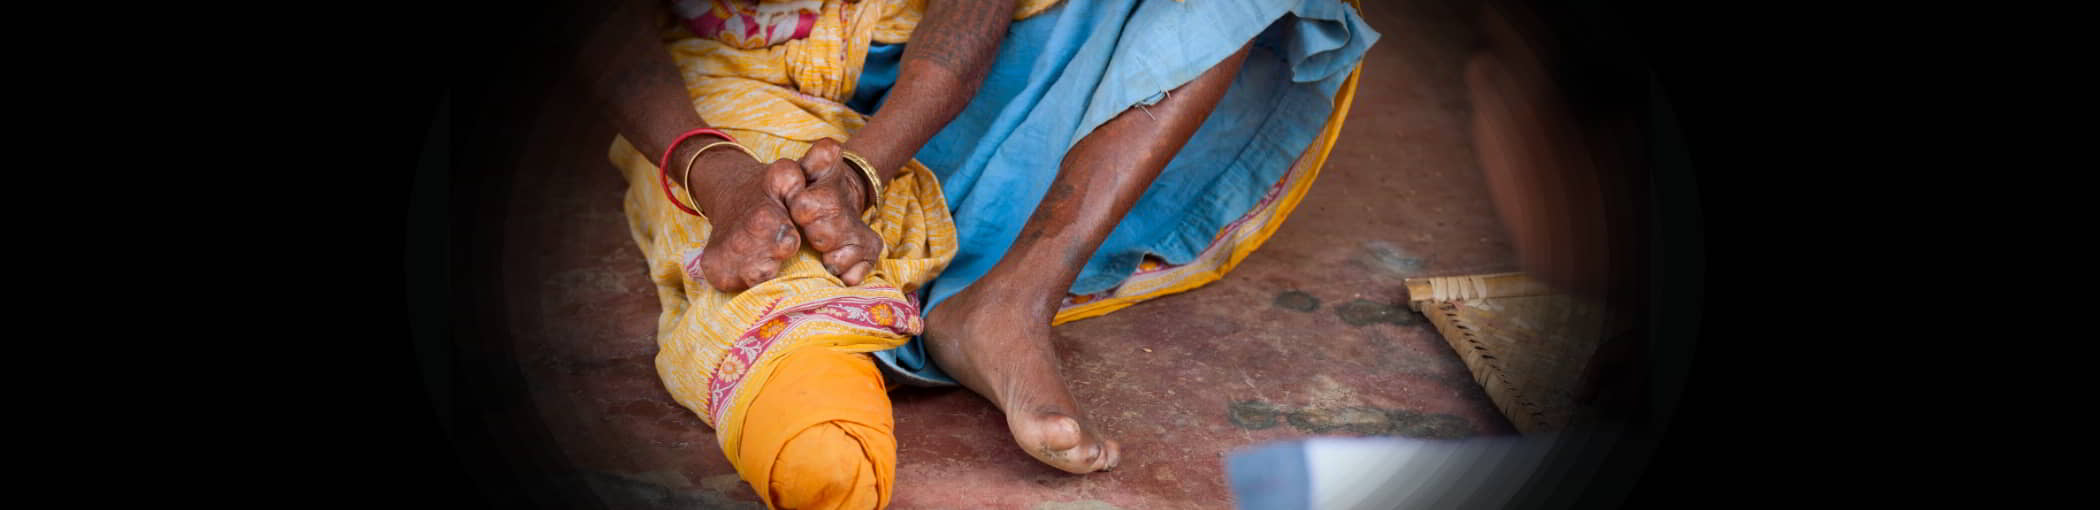 Physical Effects of Leprosy